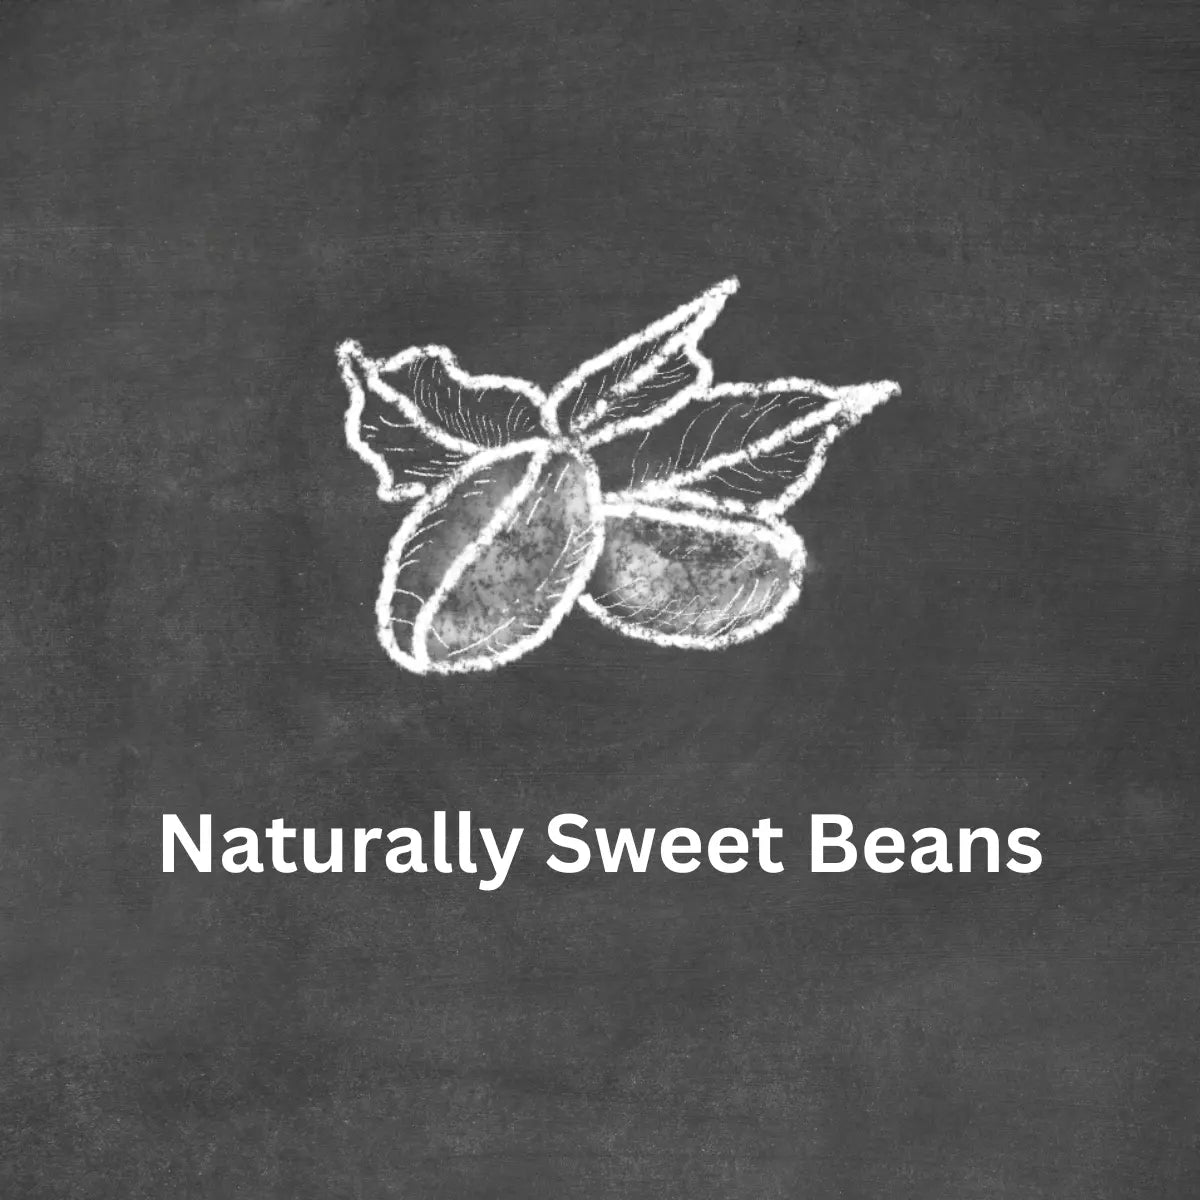 Select naturally sweet coffee beans to get peak flavor